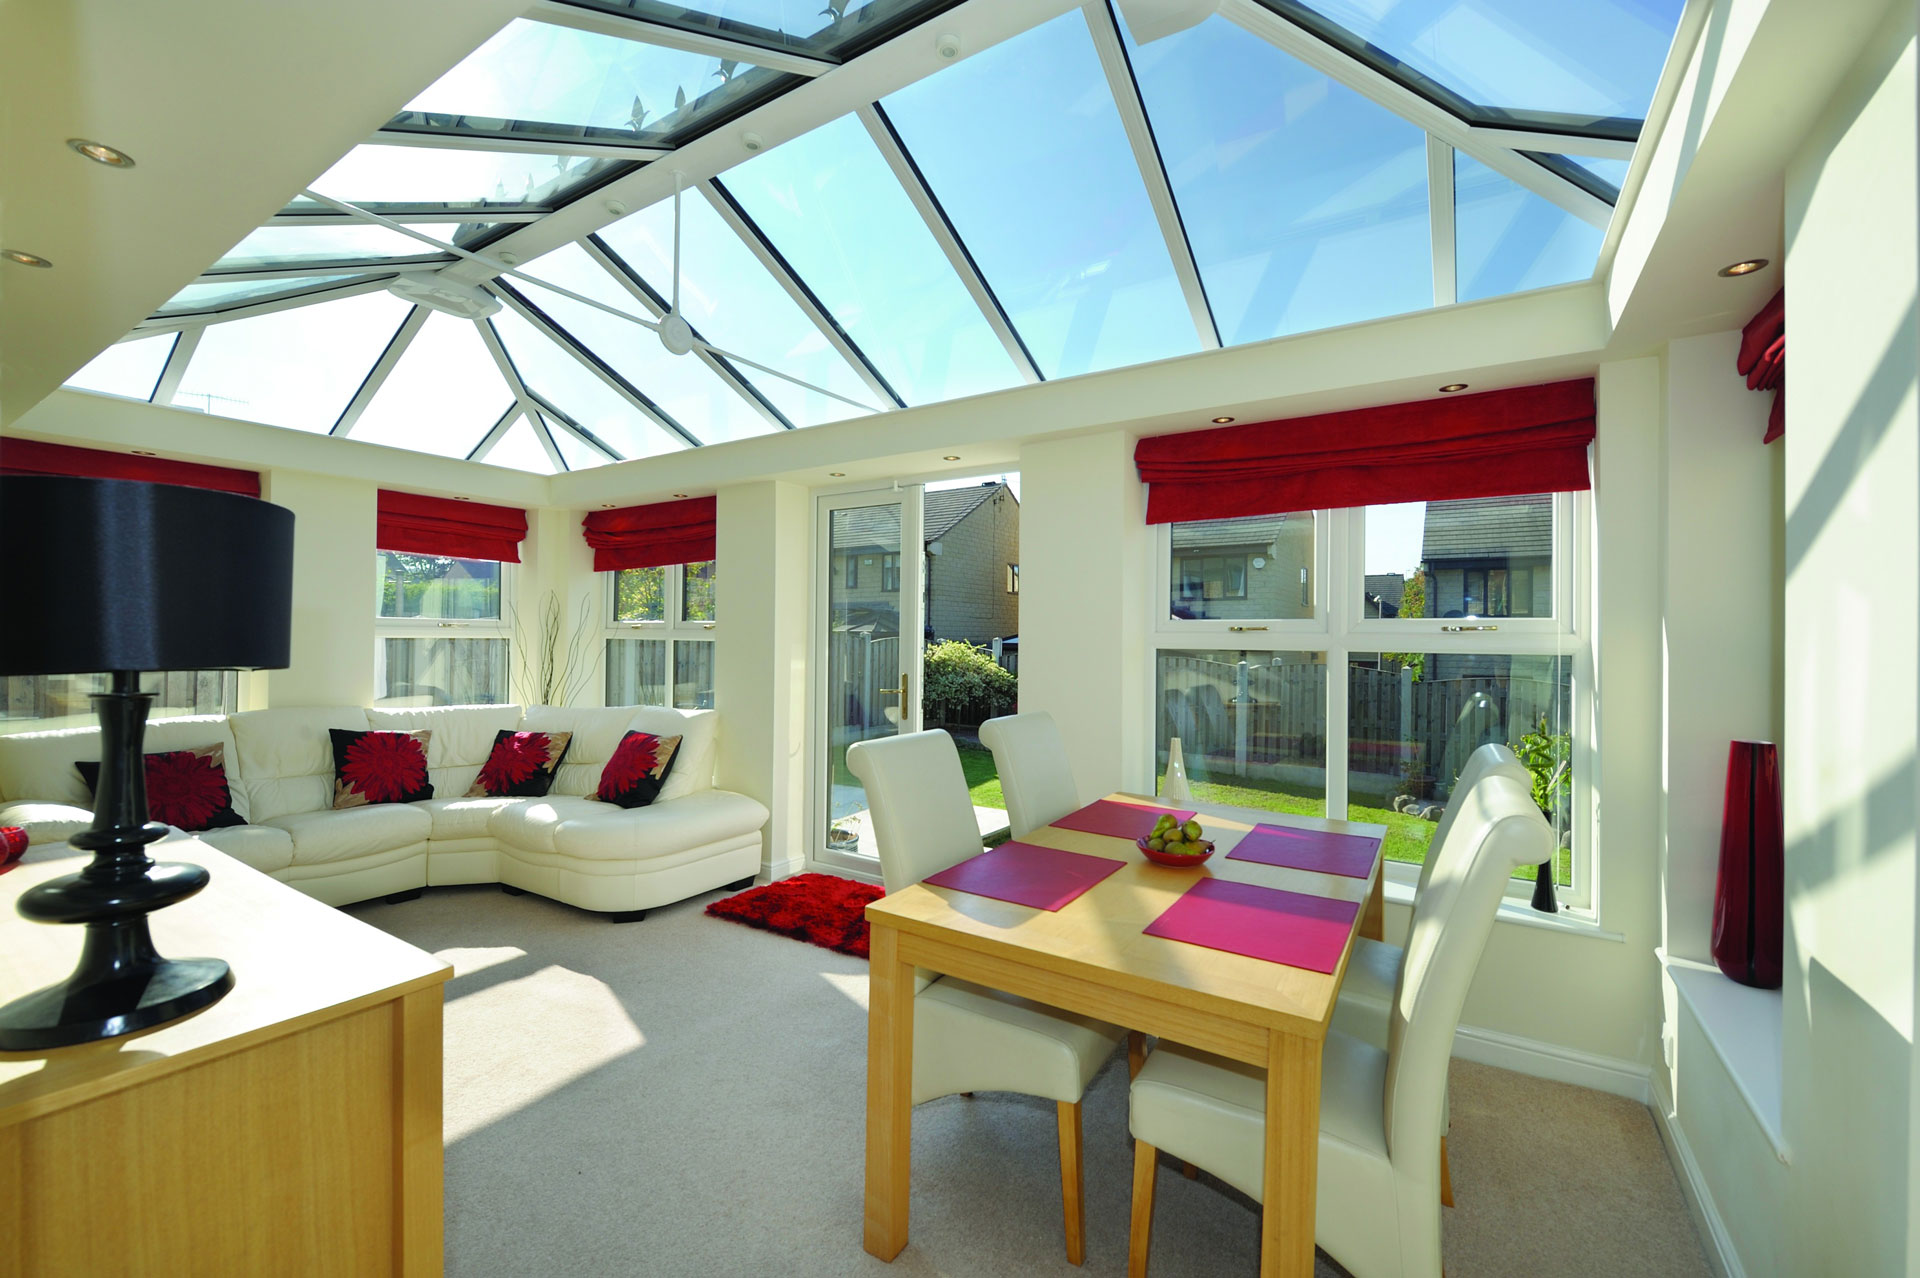 Upward view of upvc windows in the roof of a conservatory being used as a living room.